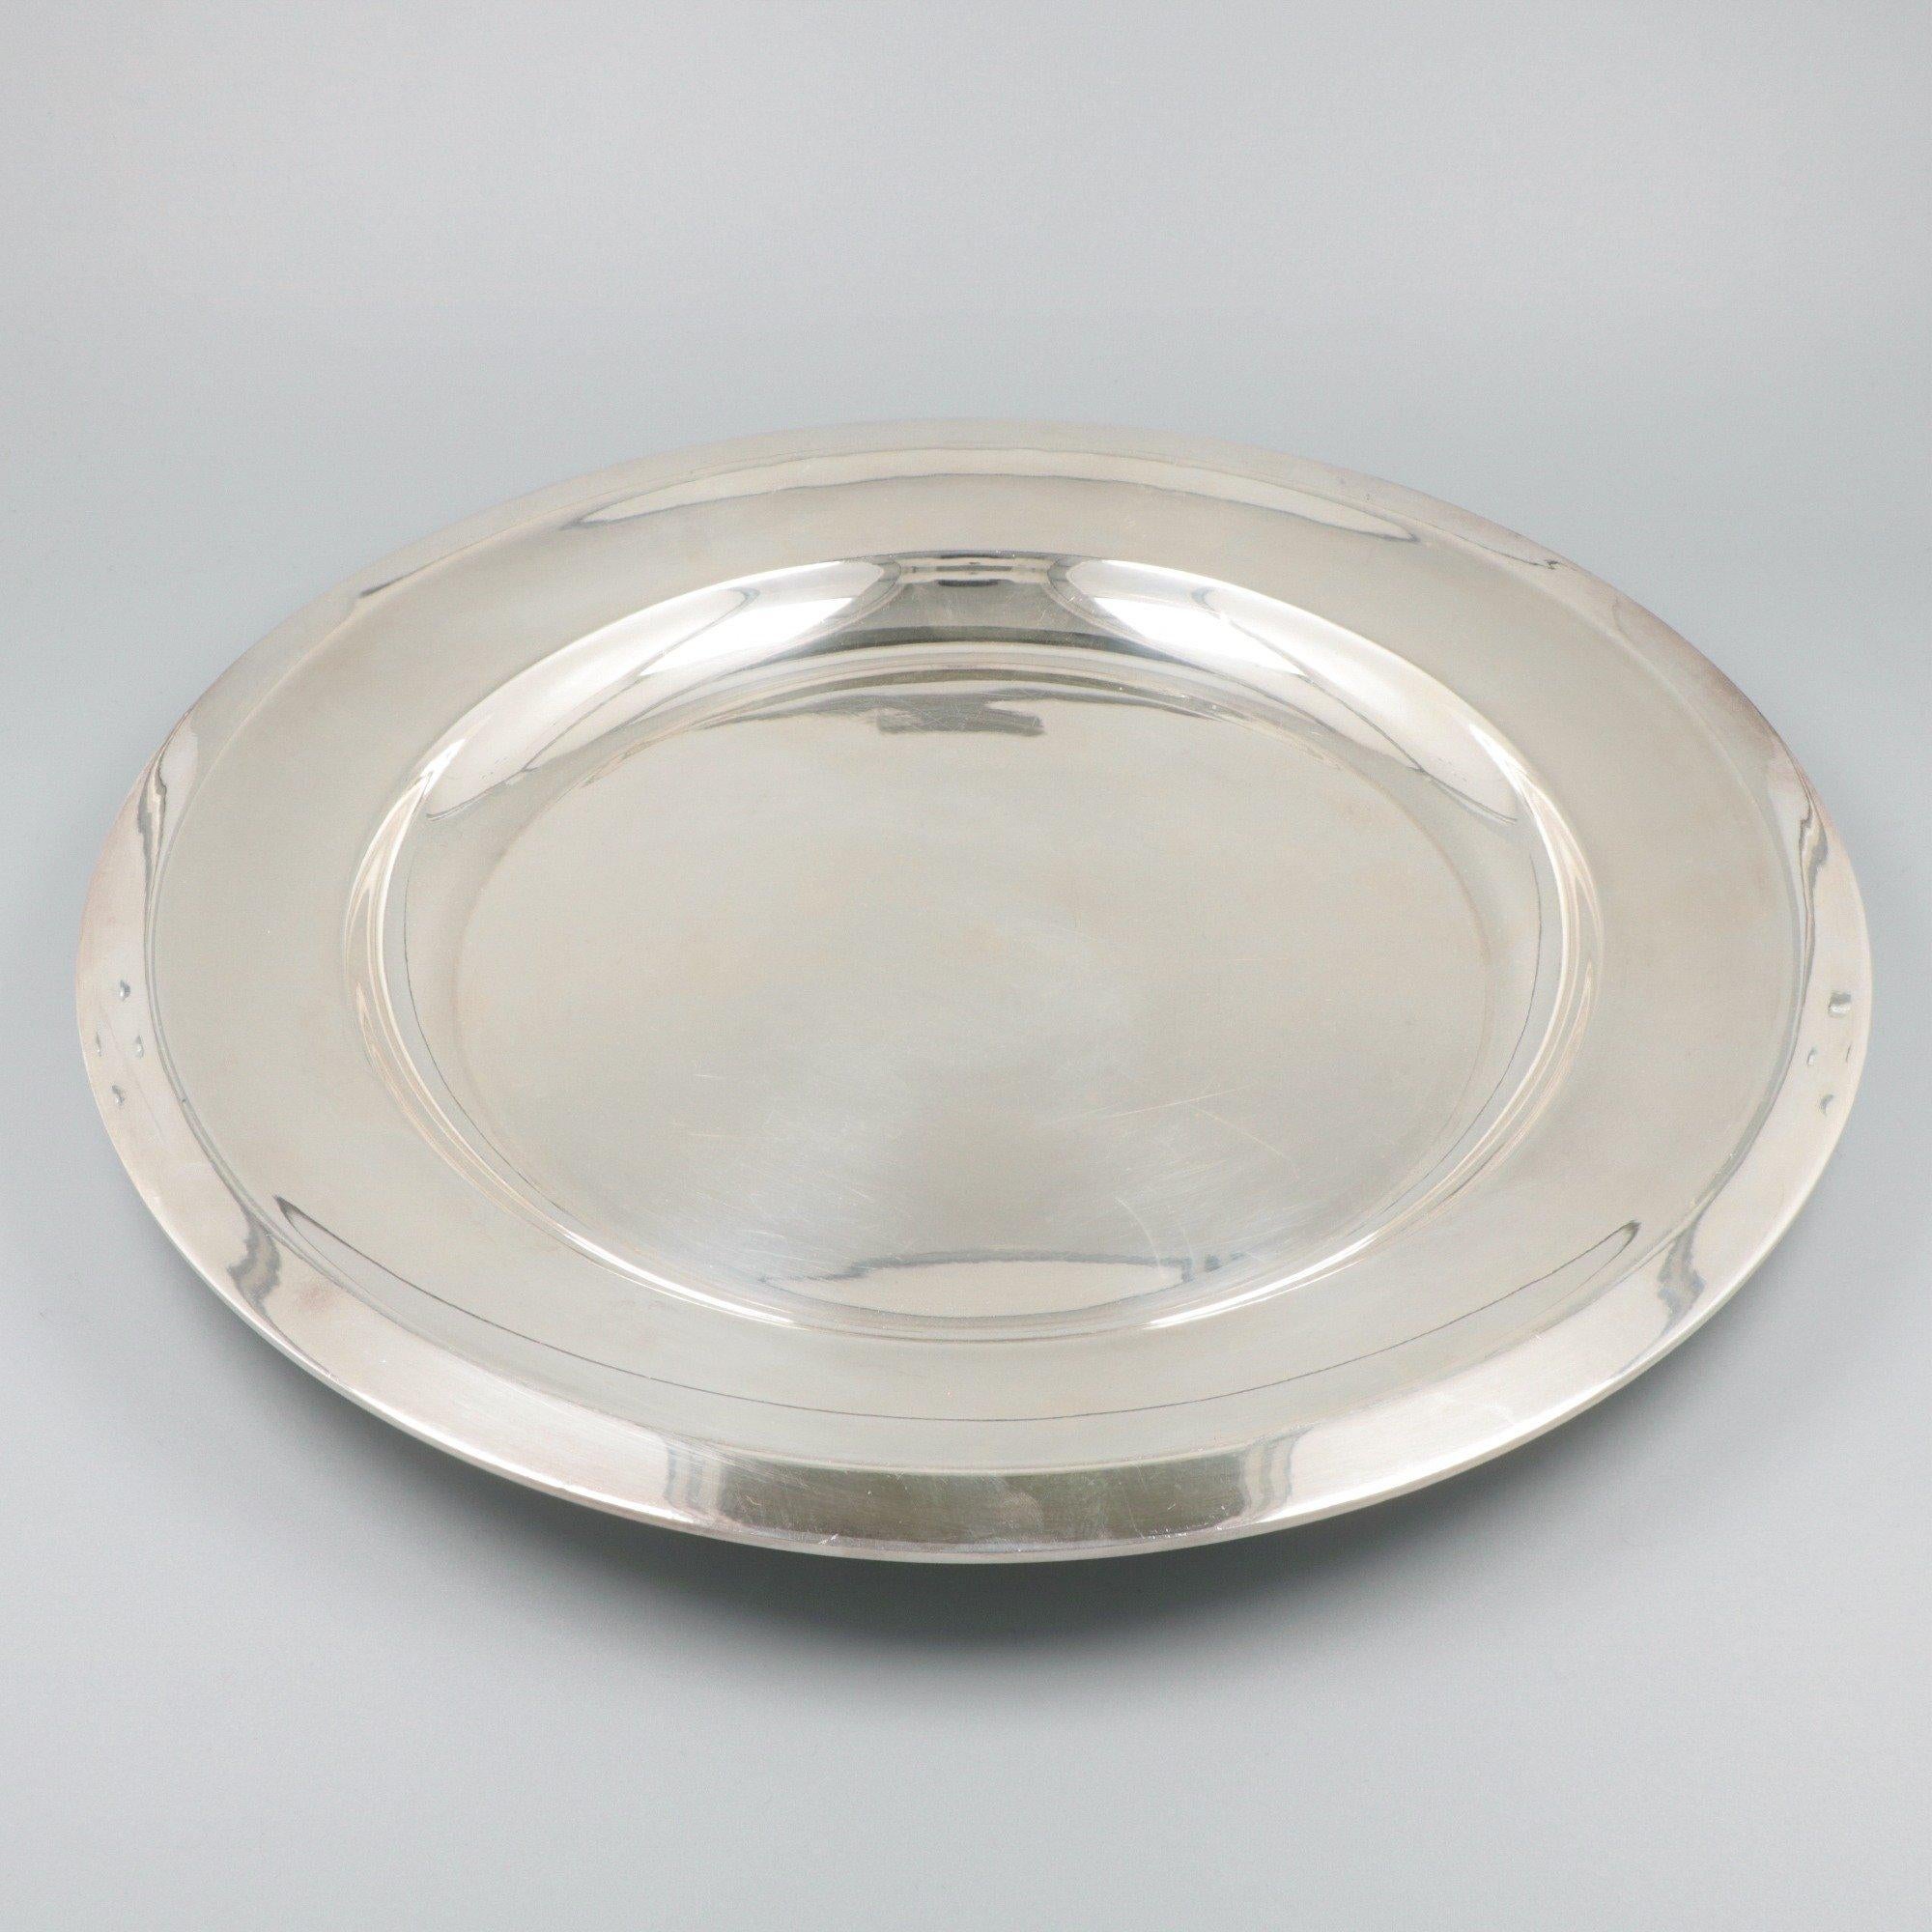 Late 20th Century Christofle, Silver Plated Serving Bowl / Fruit Bowl For Sale